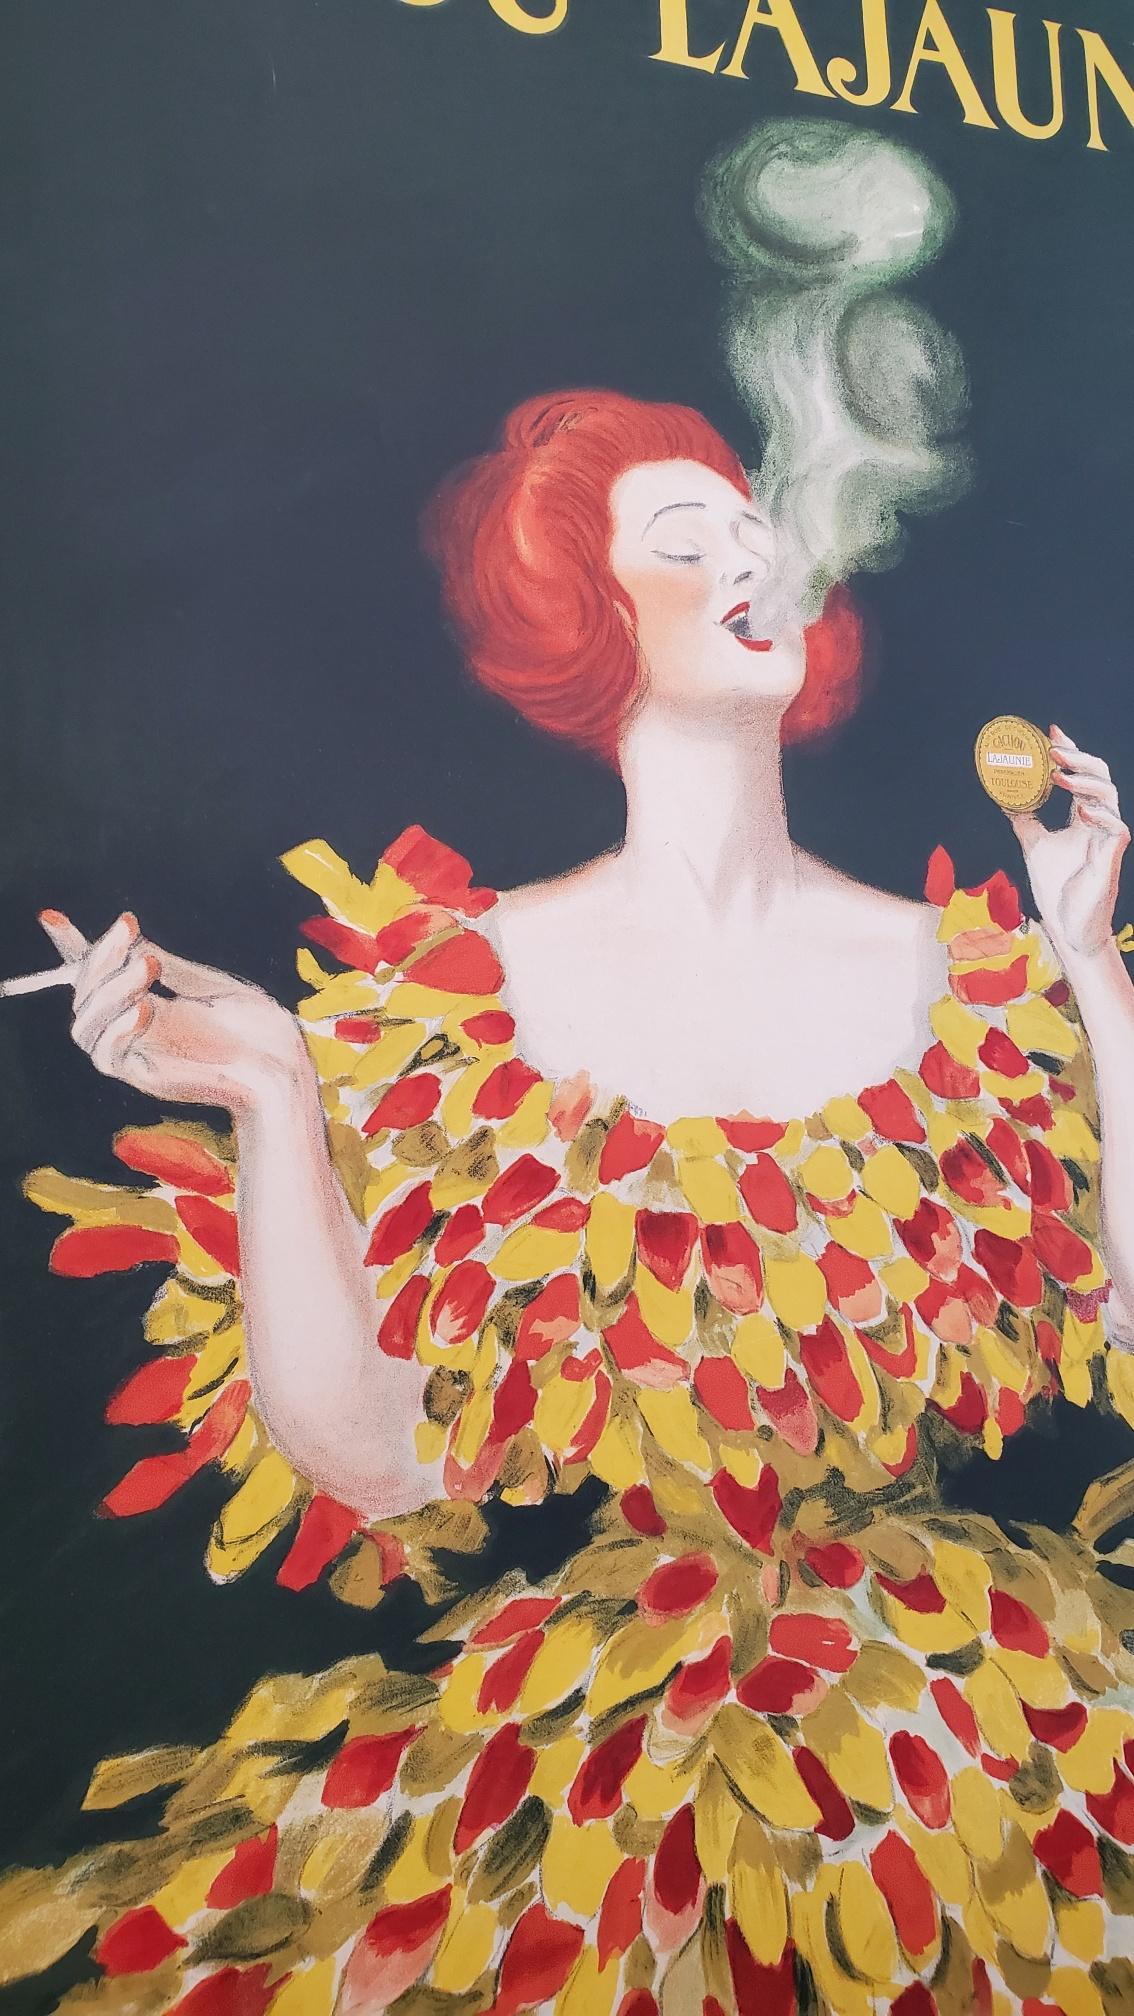 One of the most famous posters by Leonetto Cappiello for Cachou Lajaunie, a breath mint originally used to disguise the smell of tobacco. A distinctly feminine piece by Cappiello, and a fine example of his style, wonderful colors, textured